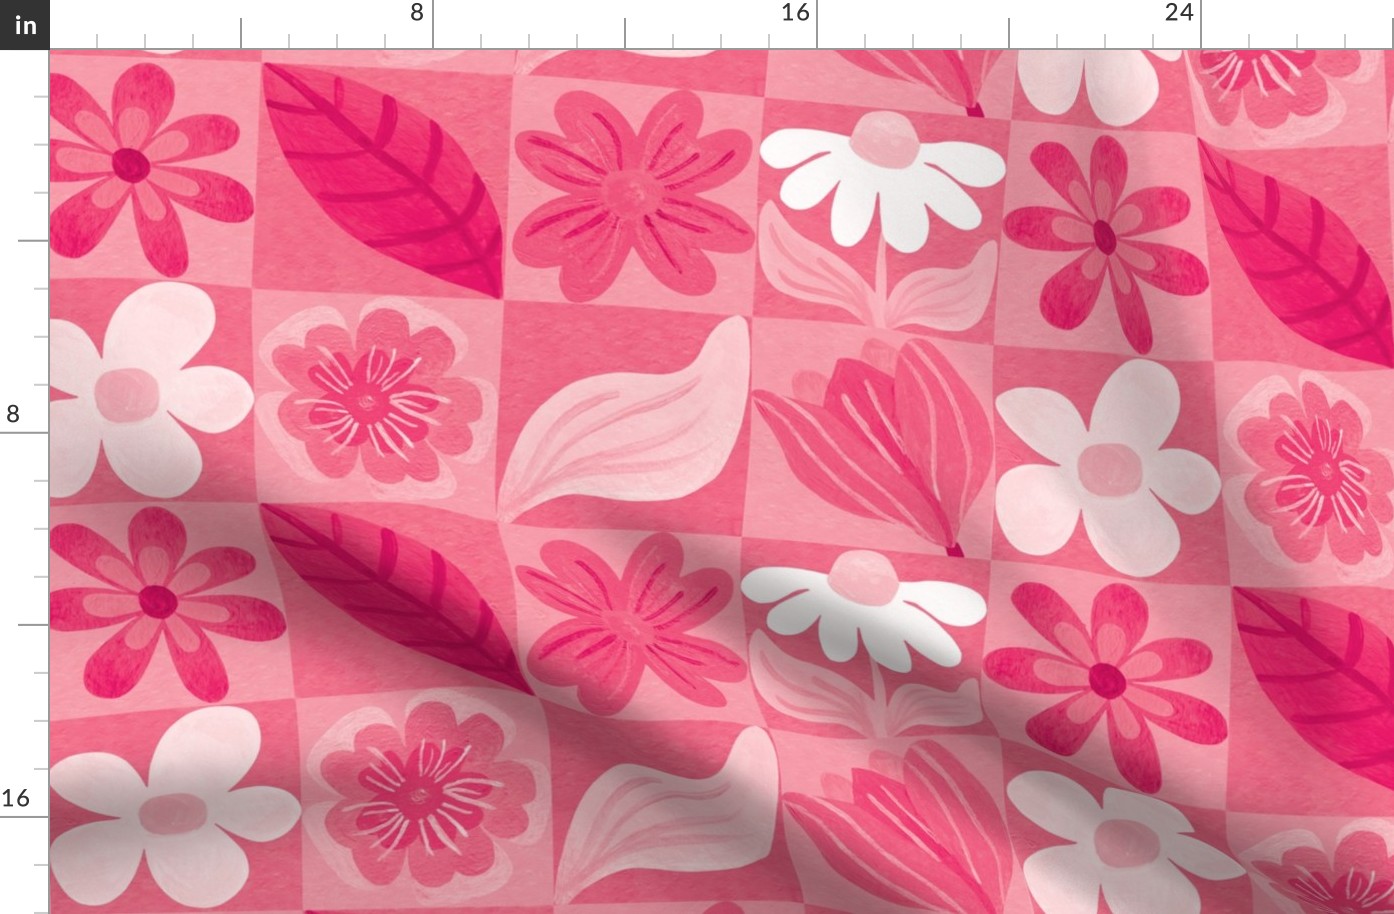 Pink Monochrome Grid Pattern with Abstract Flowers